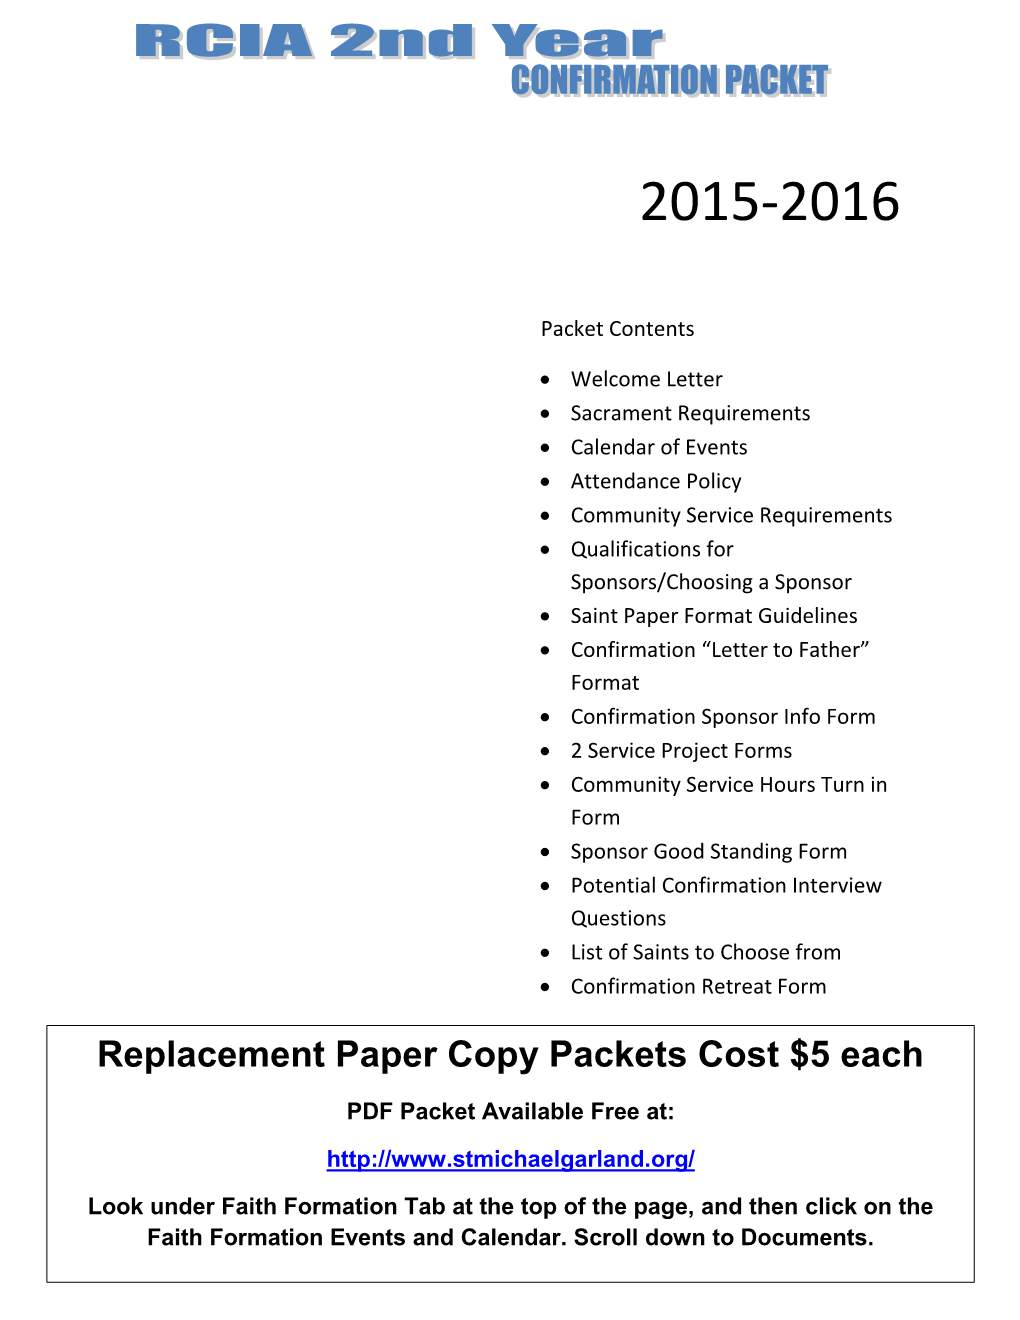 Replacement Paper Copy Packets Cost $5 Each